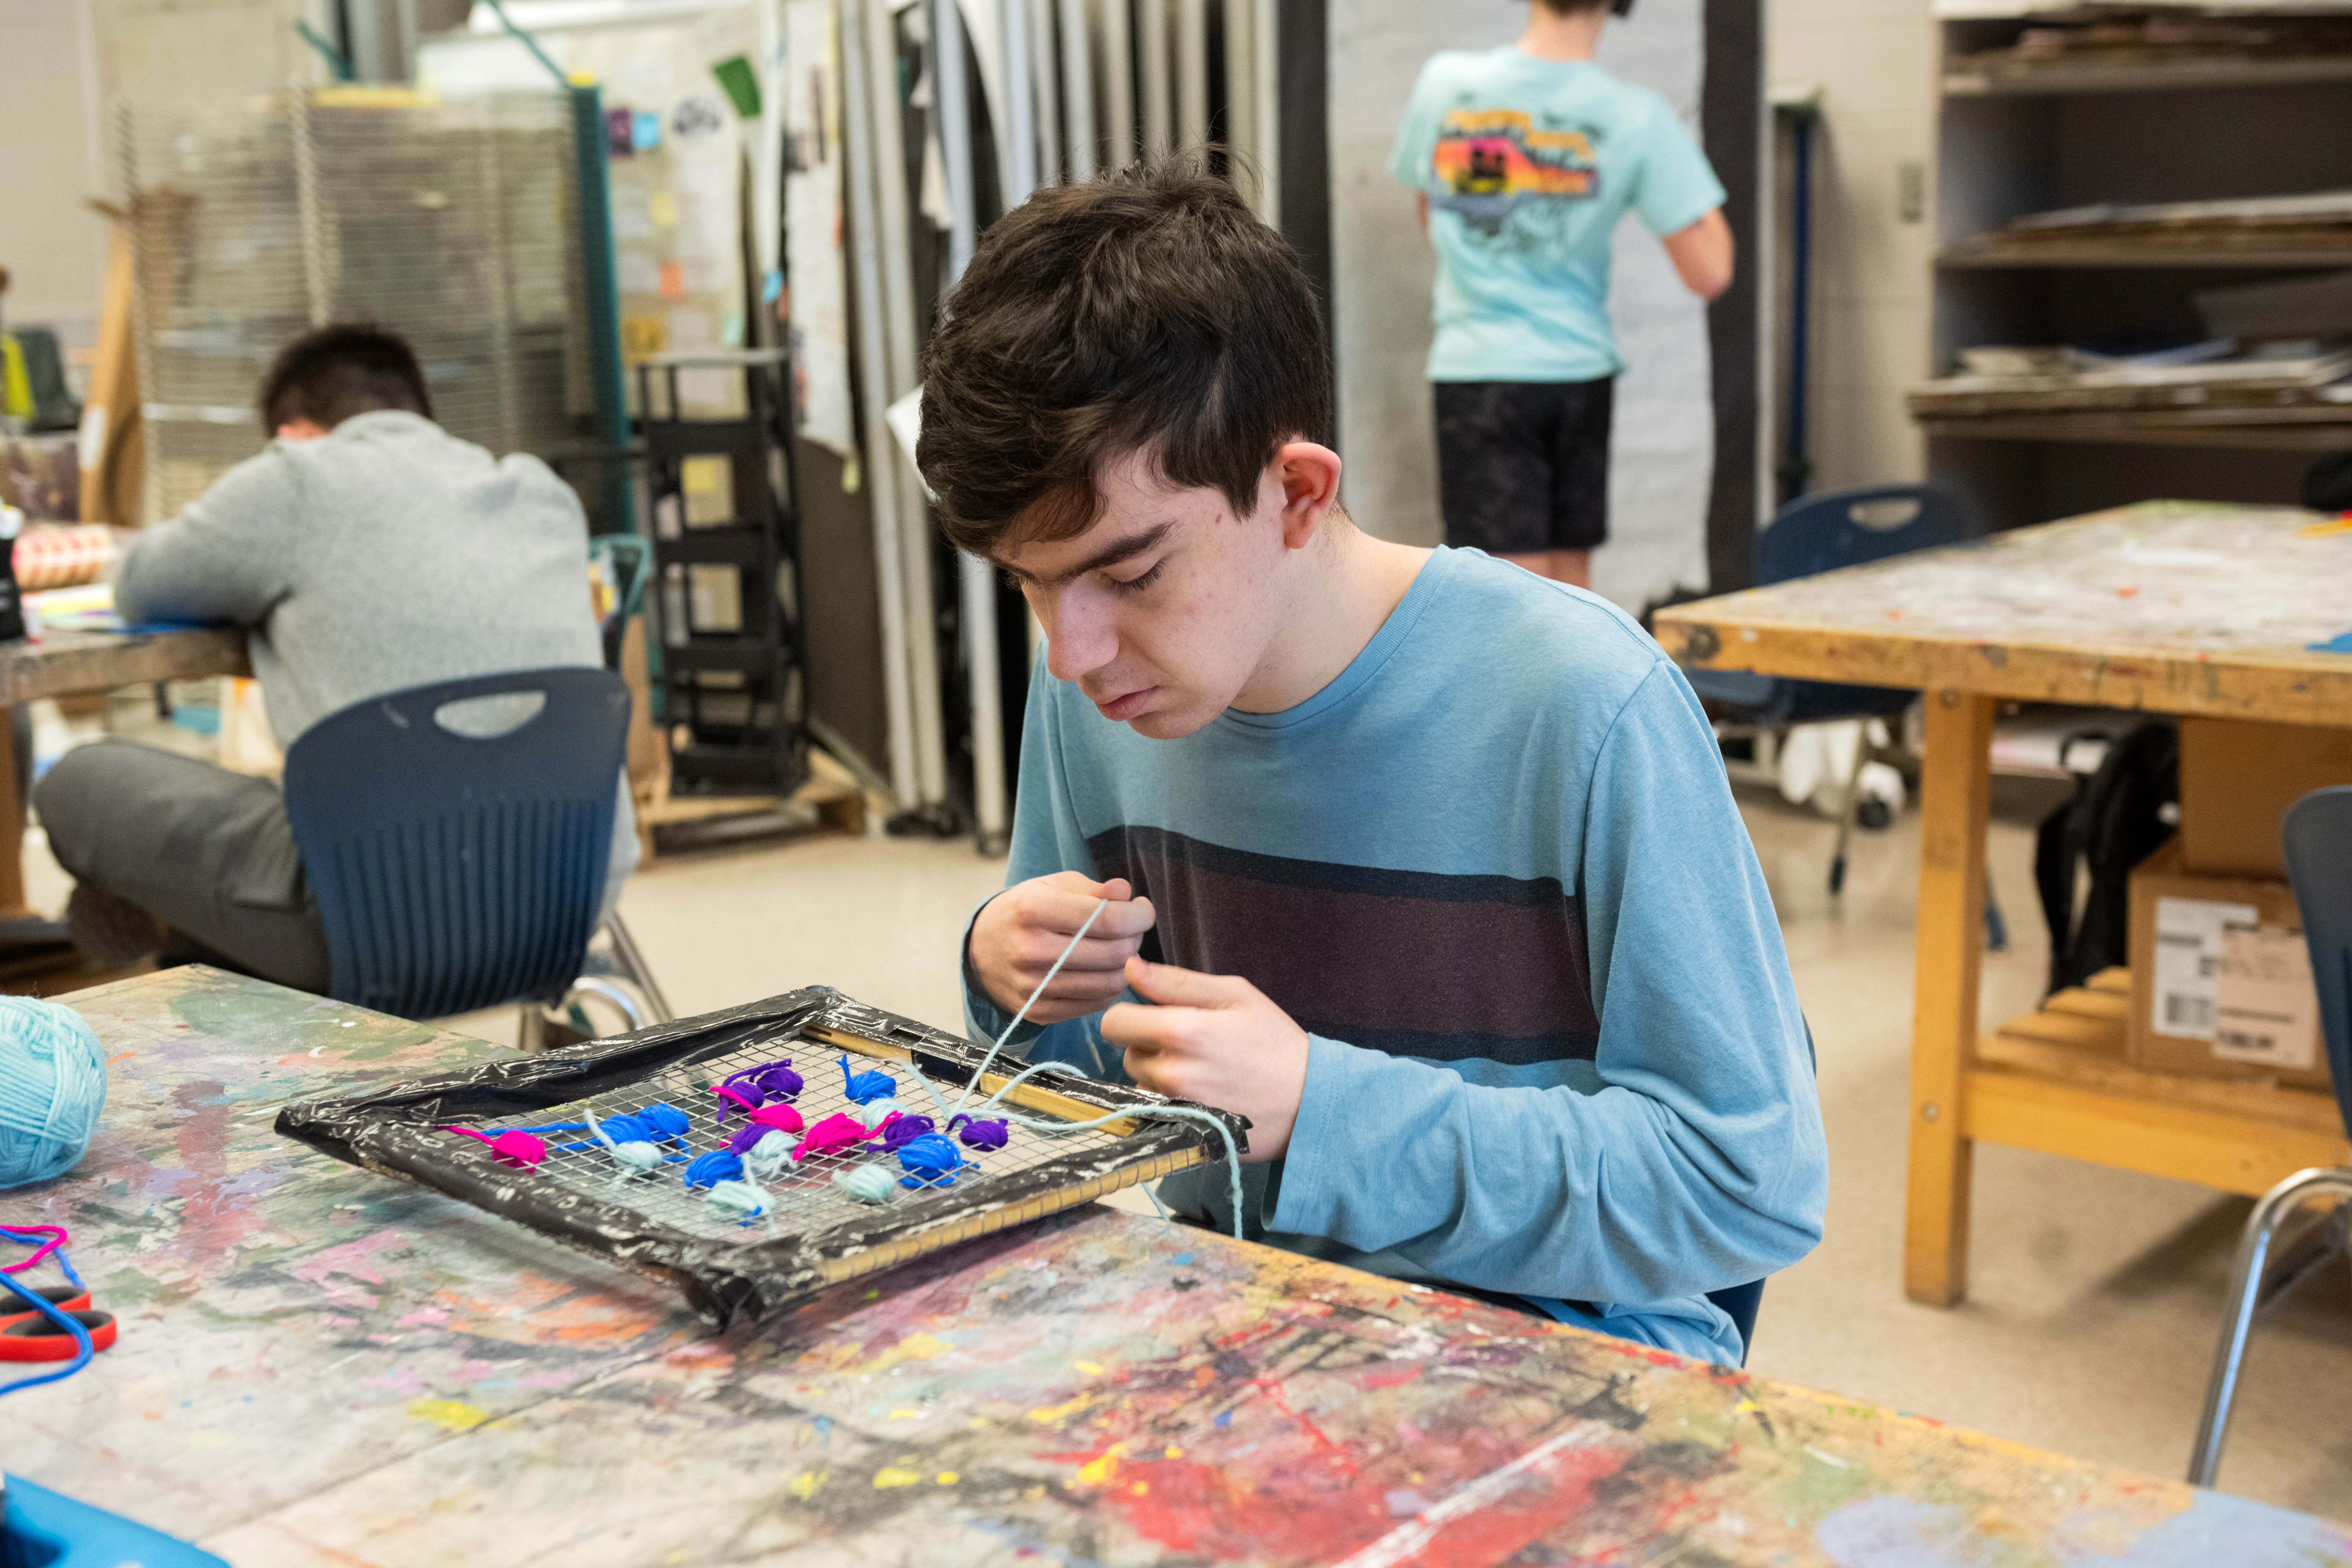 A student ties colored yarn to a wire grid. The Inclusive Fine Arts class encourages students to "find their language" with whatever medium they desire.